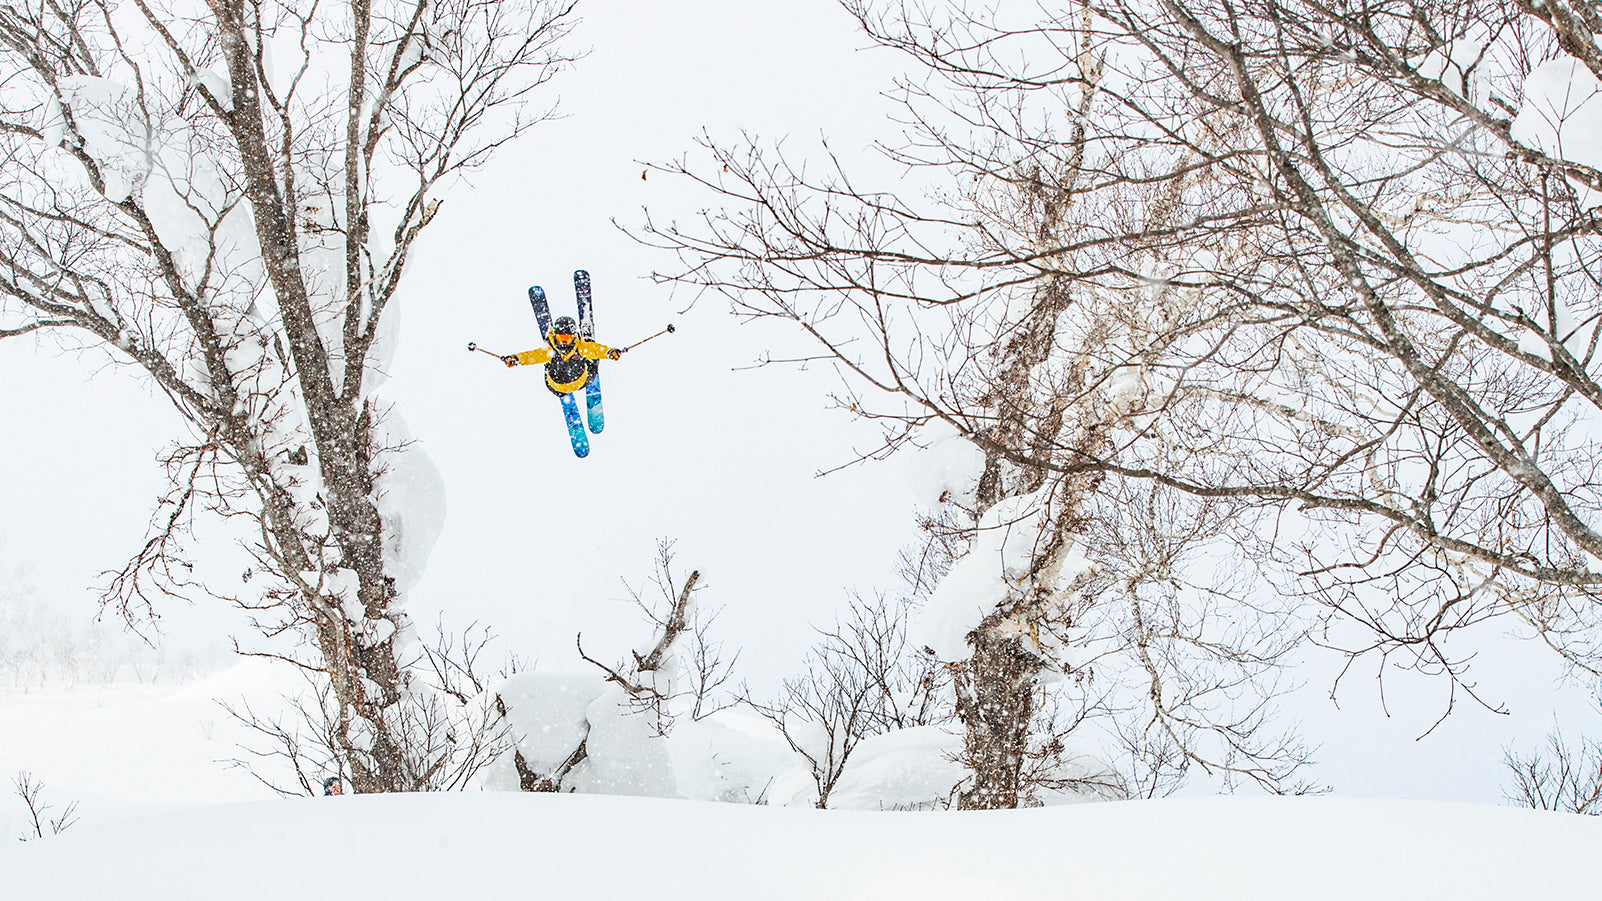 Flylow athlete Scotty VerMerris shows off the incredible tree skiing in Japan.